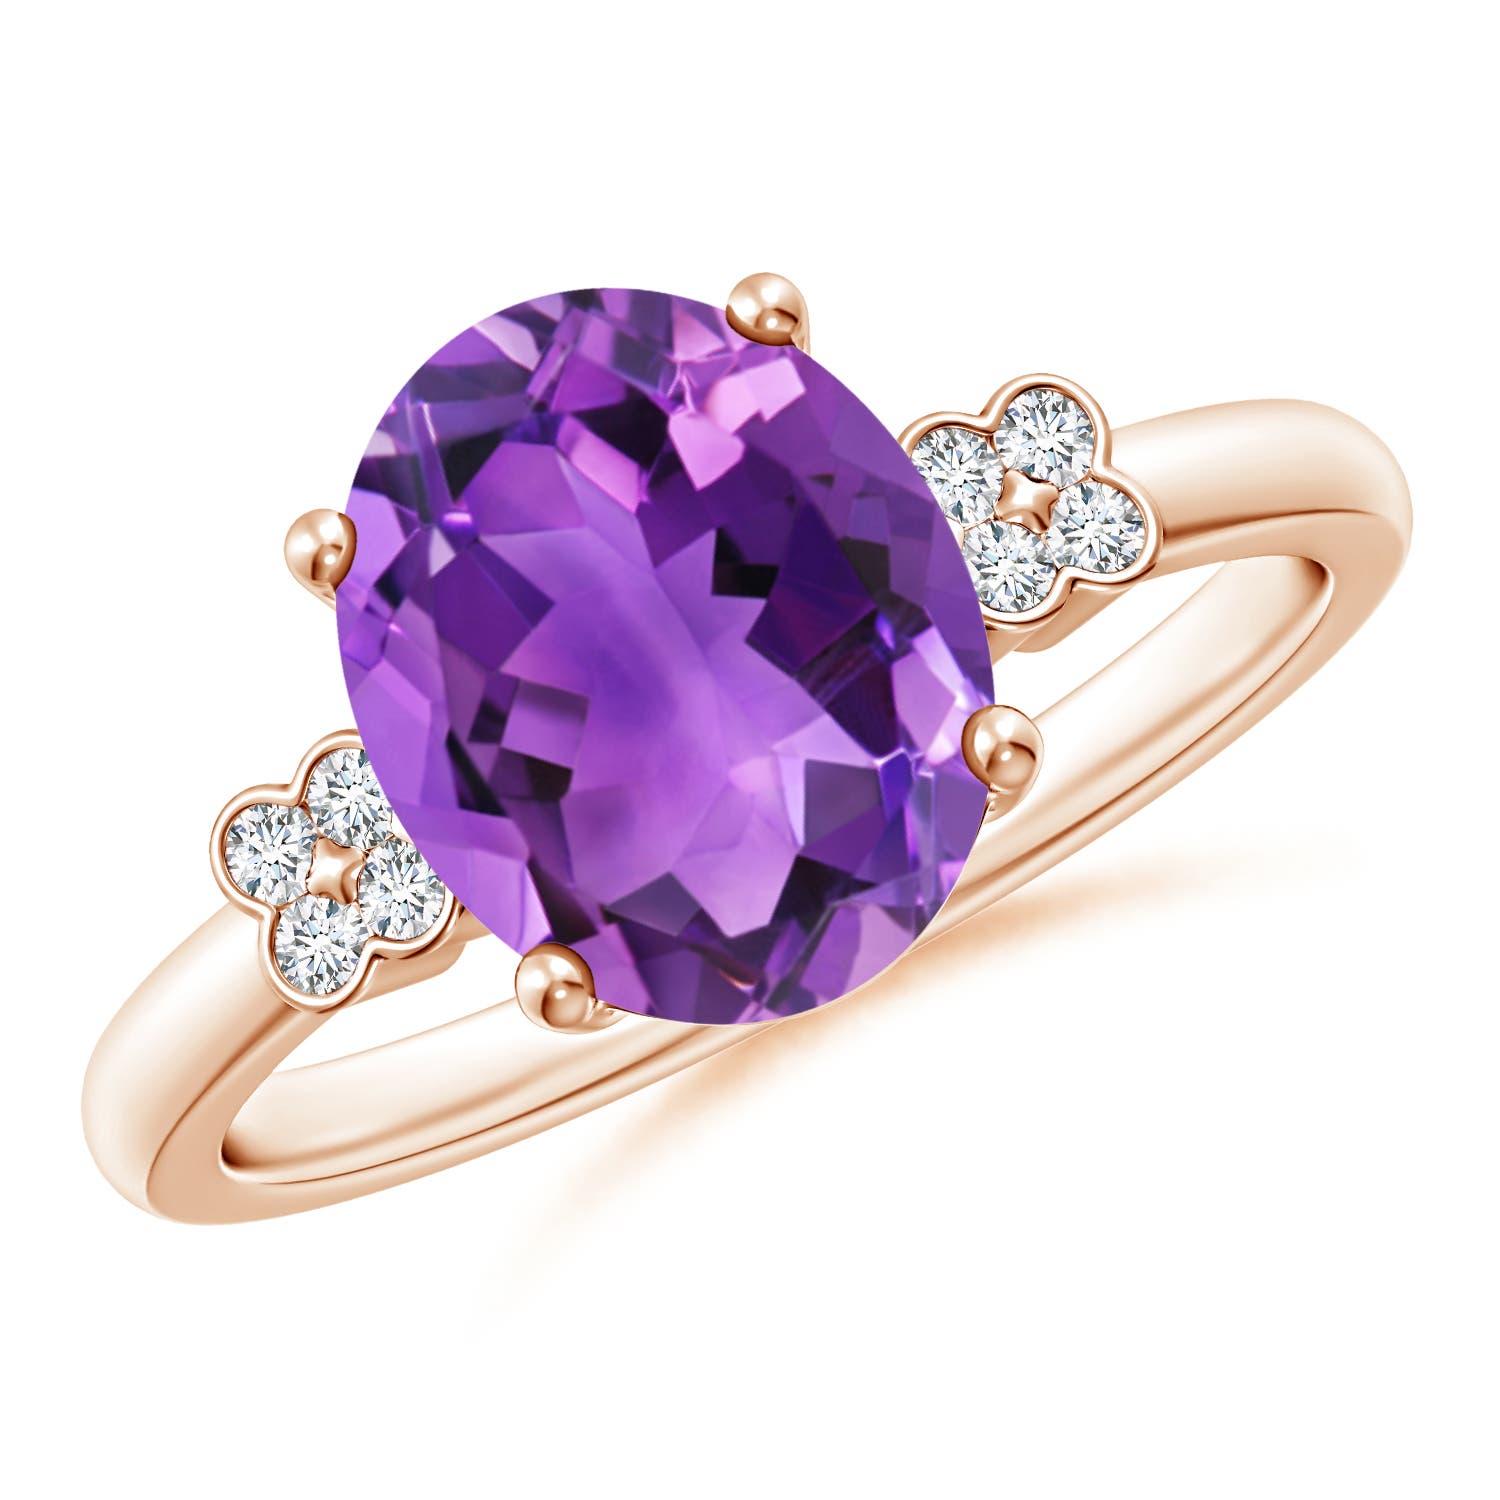 AAA - Amethyst / 2.36 CT / 14 KT Rose Gold